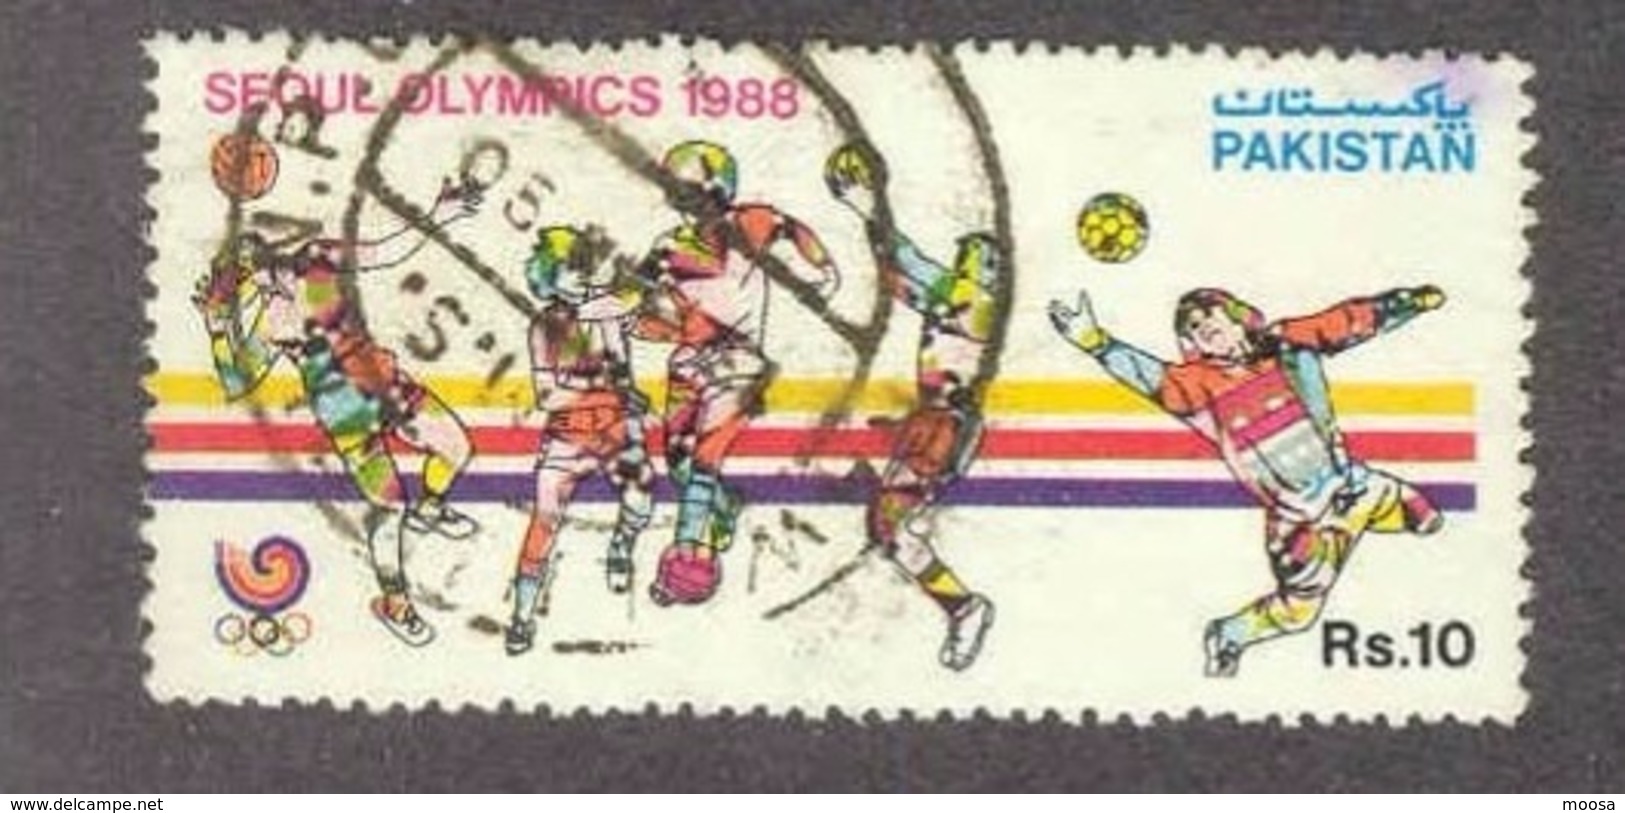 (Free Shipping*) Pakistan Sports Soccer Olympics 1988 USED STAMP - Summer 1988: Seoul